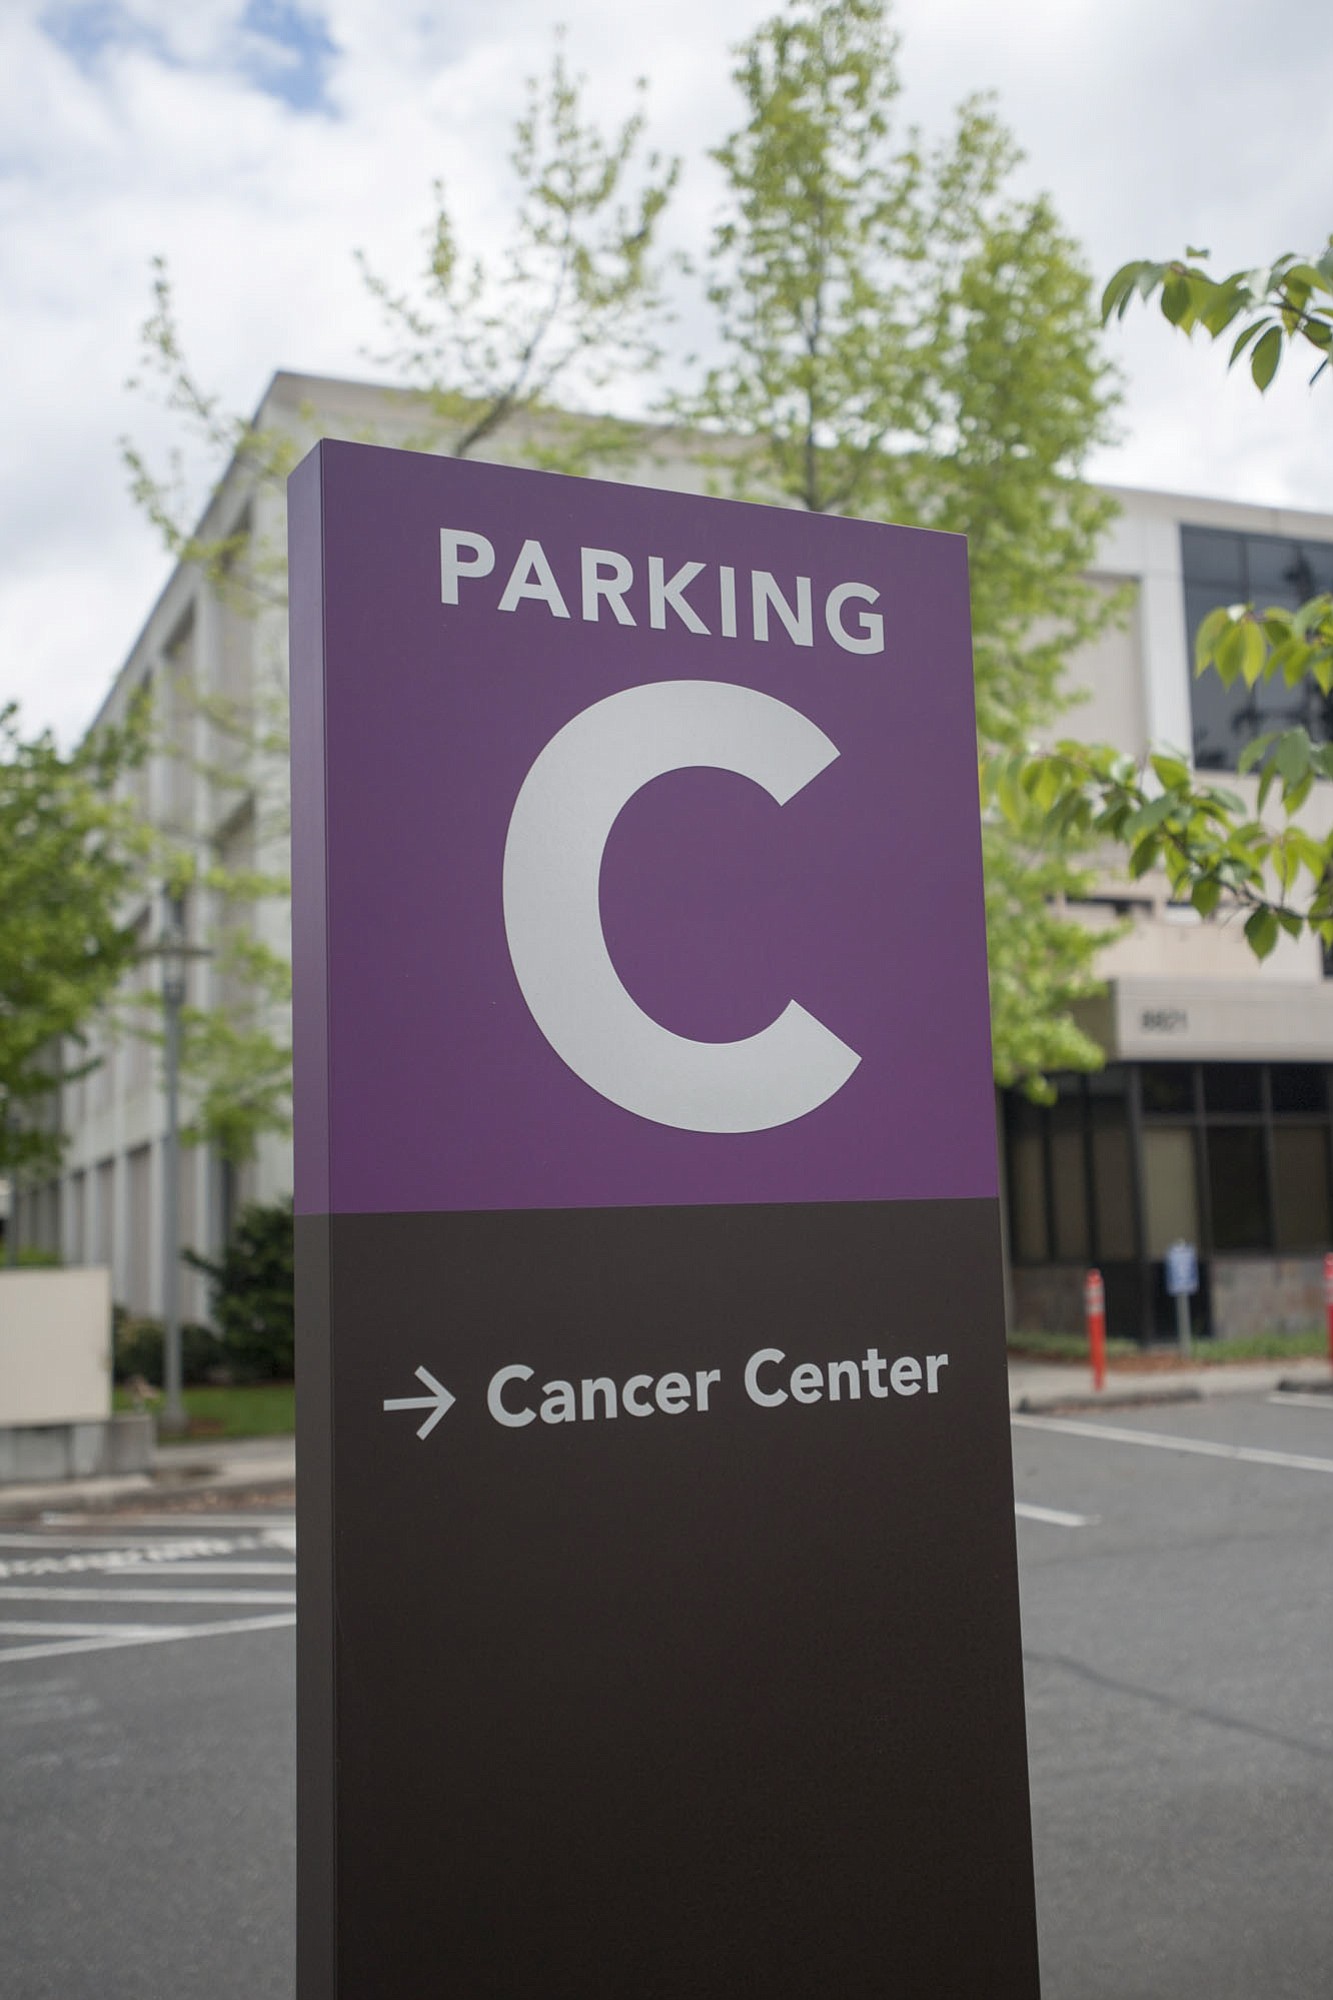 PeaceHealth Southwest Medical Center's proposed new 10-year master plan includes a 15,000-square-foot expansion of the cancer center.